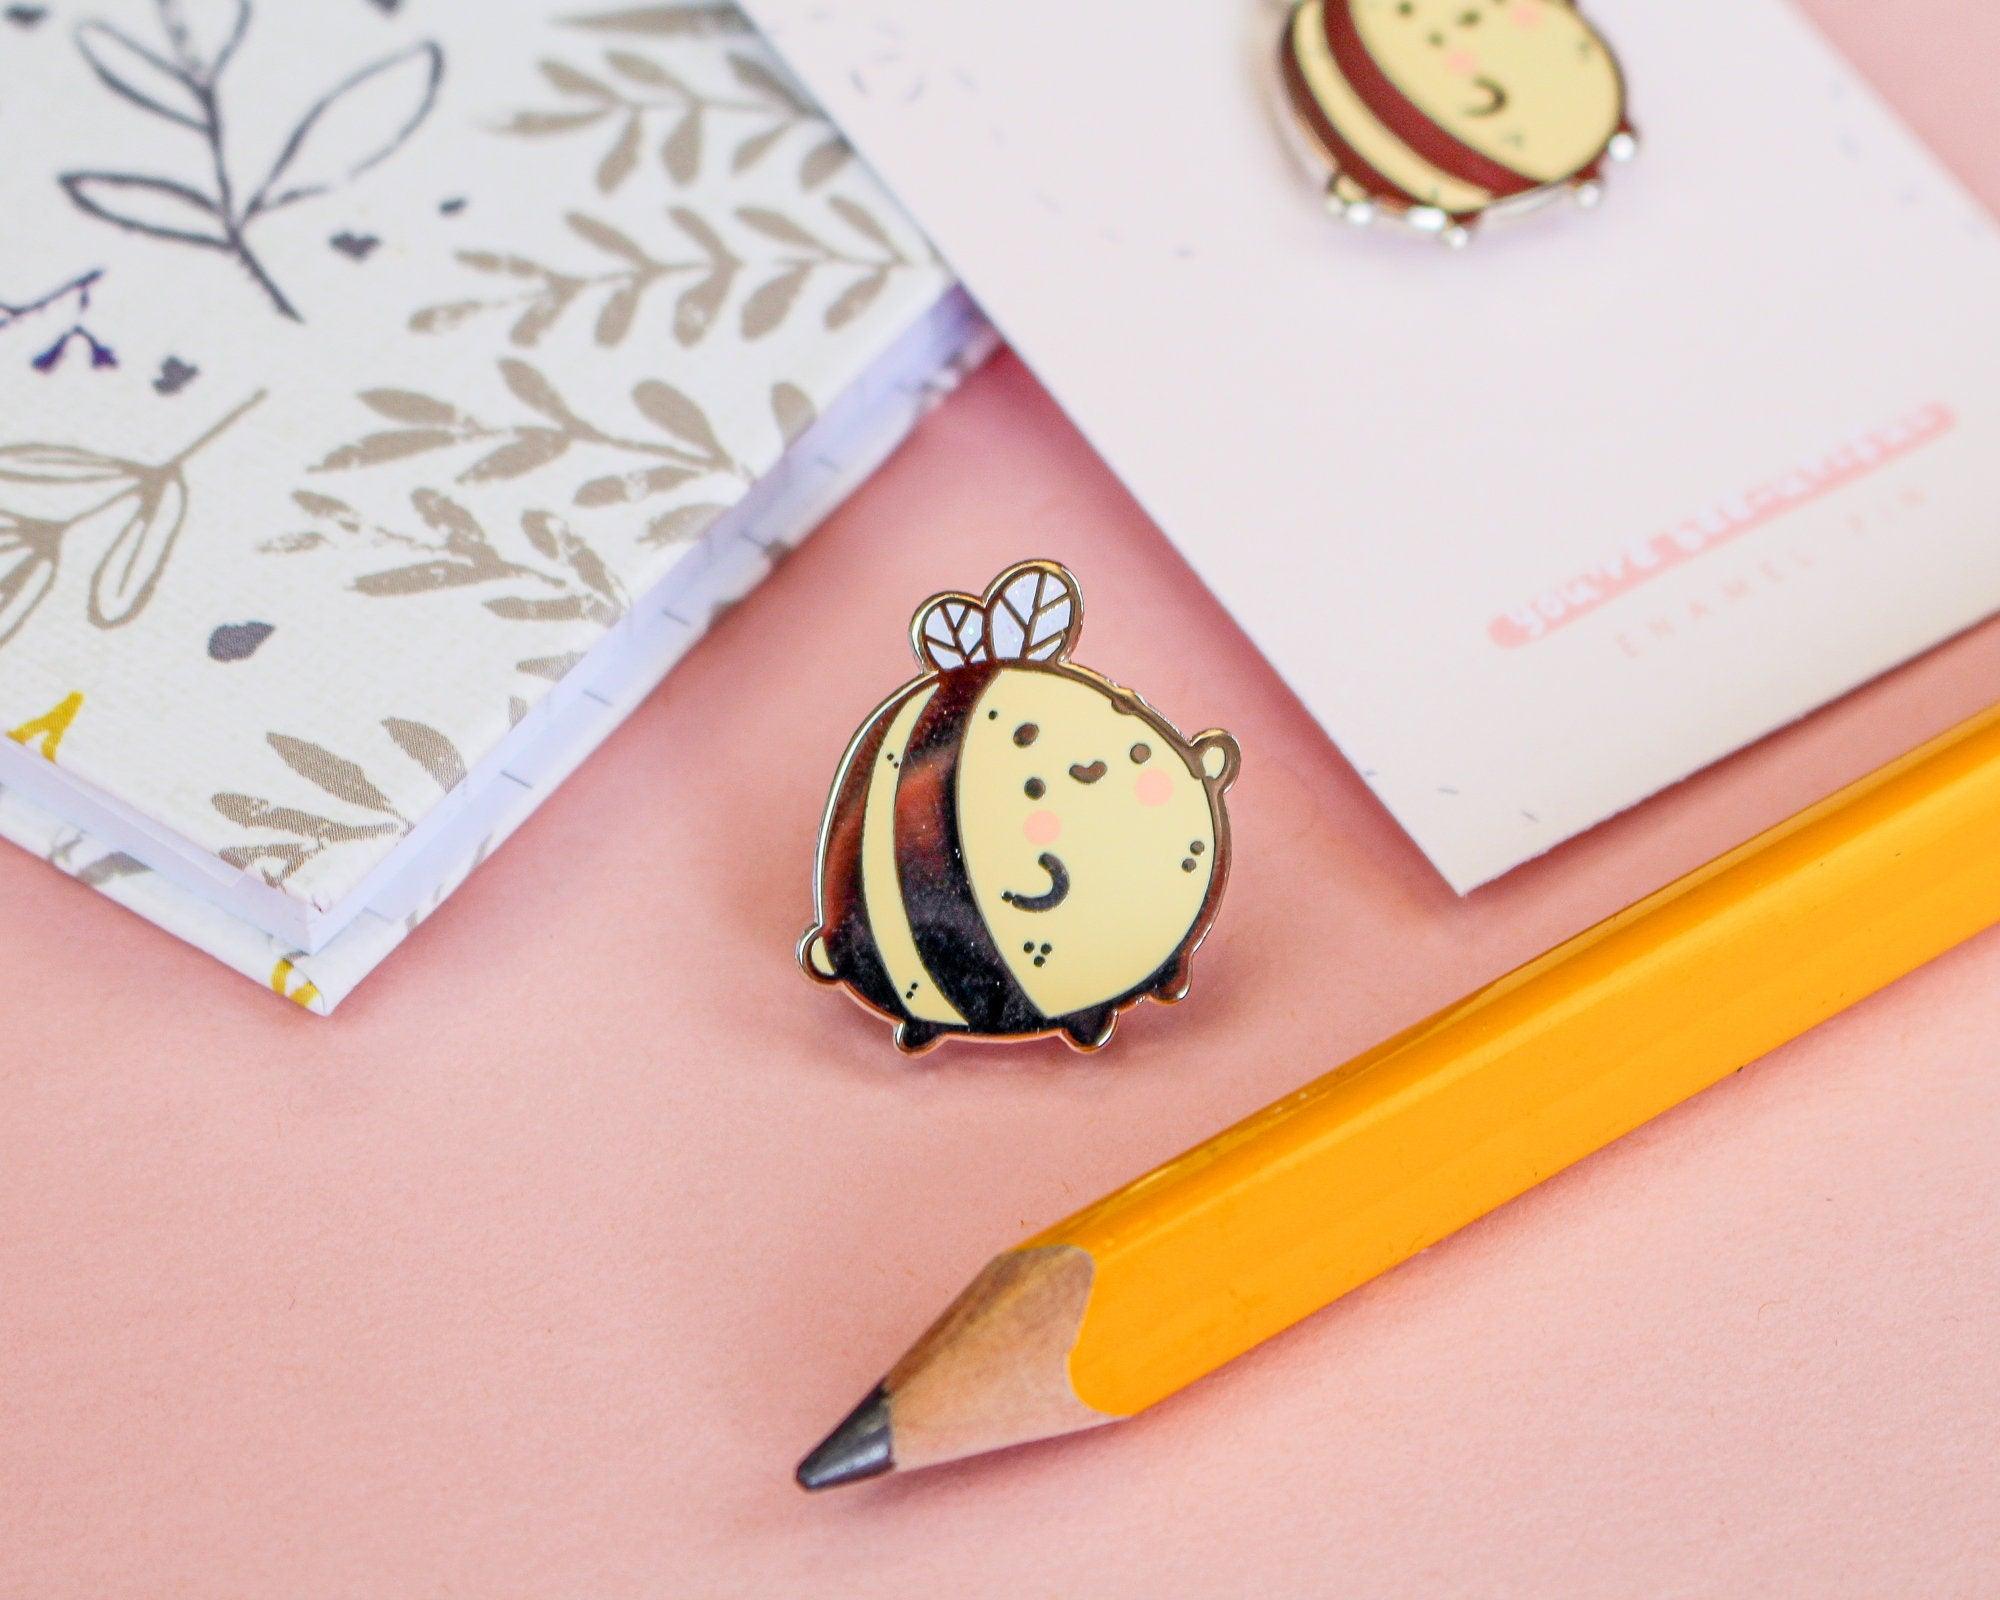 Enamel pin featuring a cute bumble bee design, perfect for jackets, bags, and clothing.